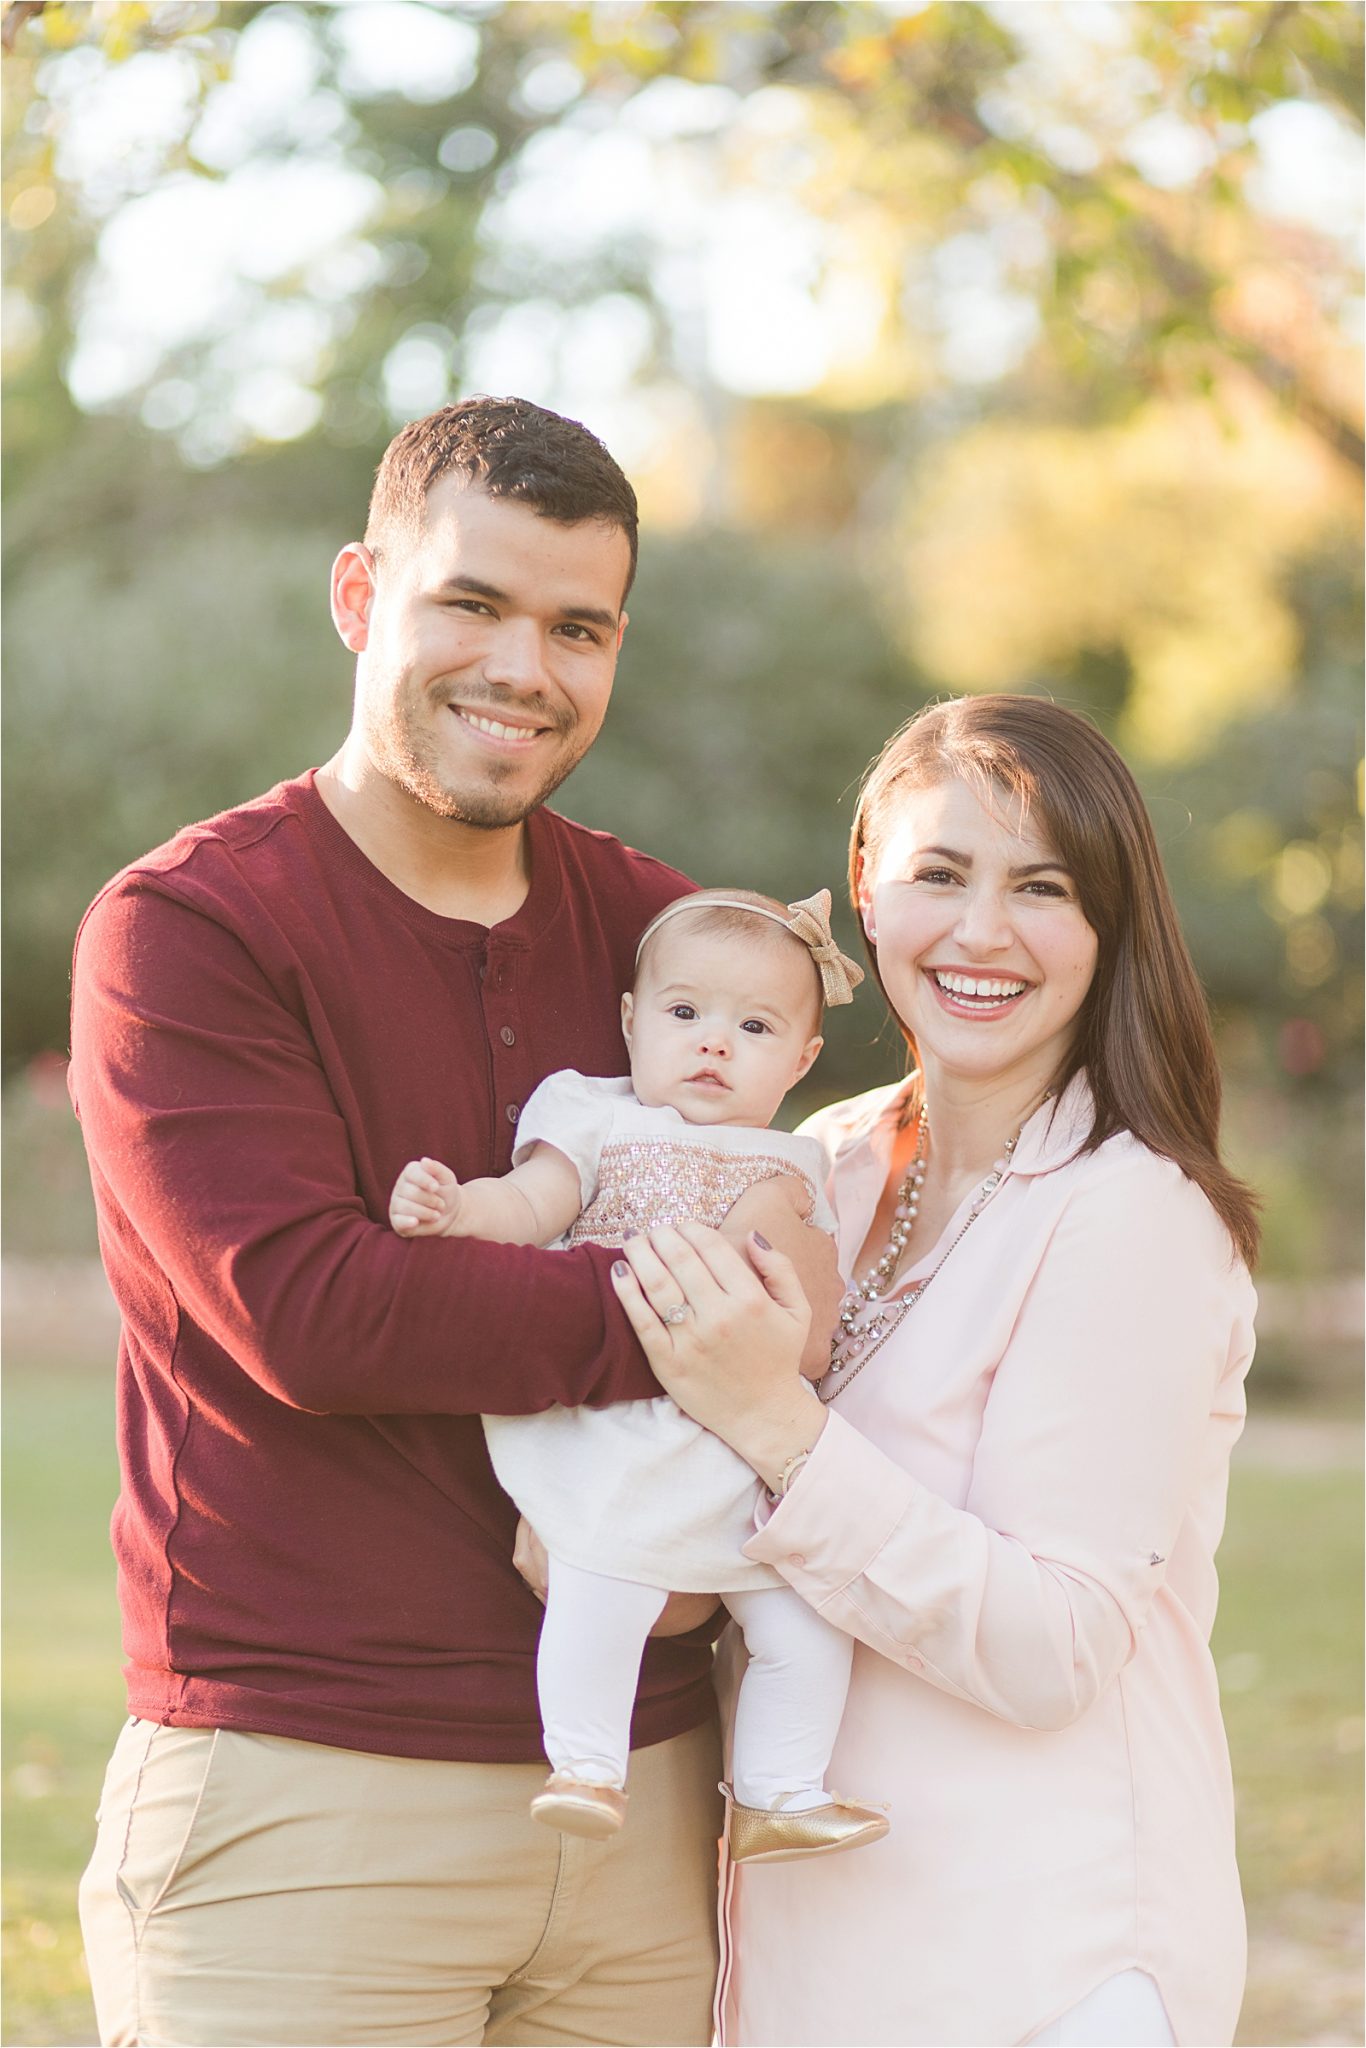 Spring Hill-Mobile Alabama Family Portraits-The Lopez Family-Baby Portrait-Family Session-Alabama Photographer-Mom and daughter photoshoot-Newborn-Fall portraits-Fall photoshoot